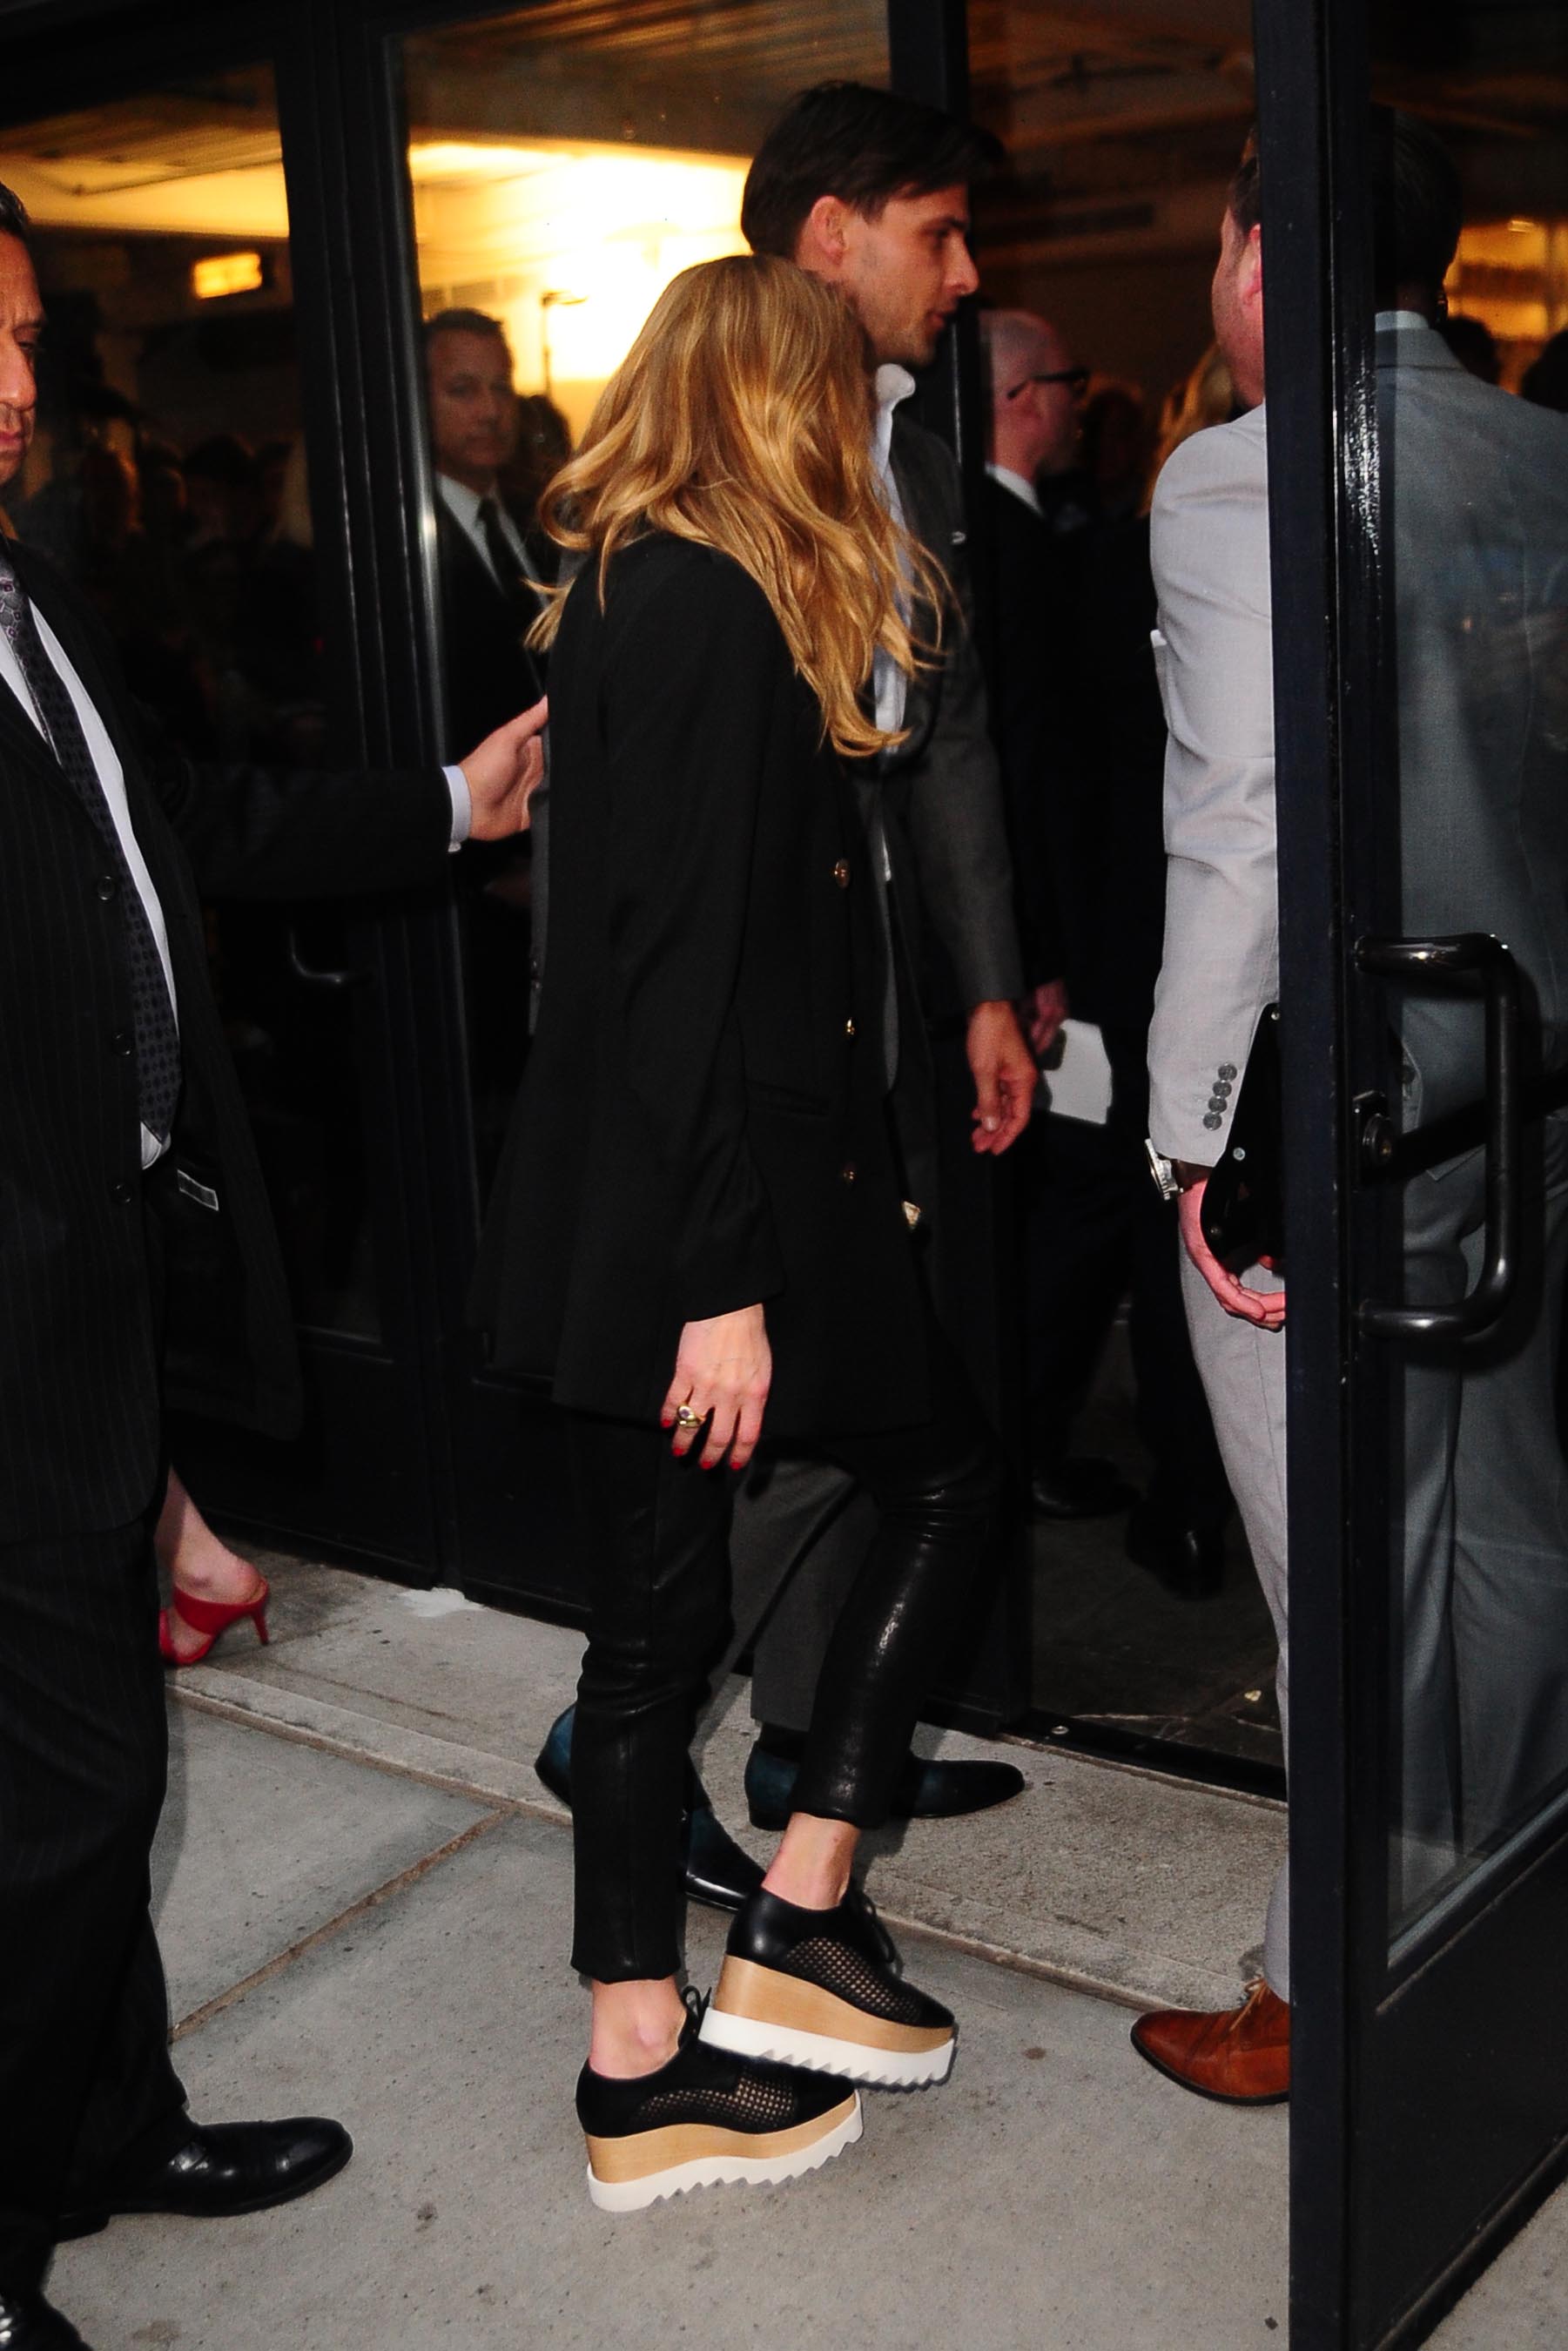 Olivia Palermo arriving at the premiere of Mother’s Day